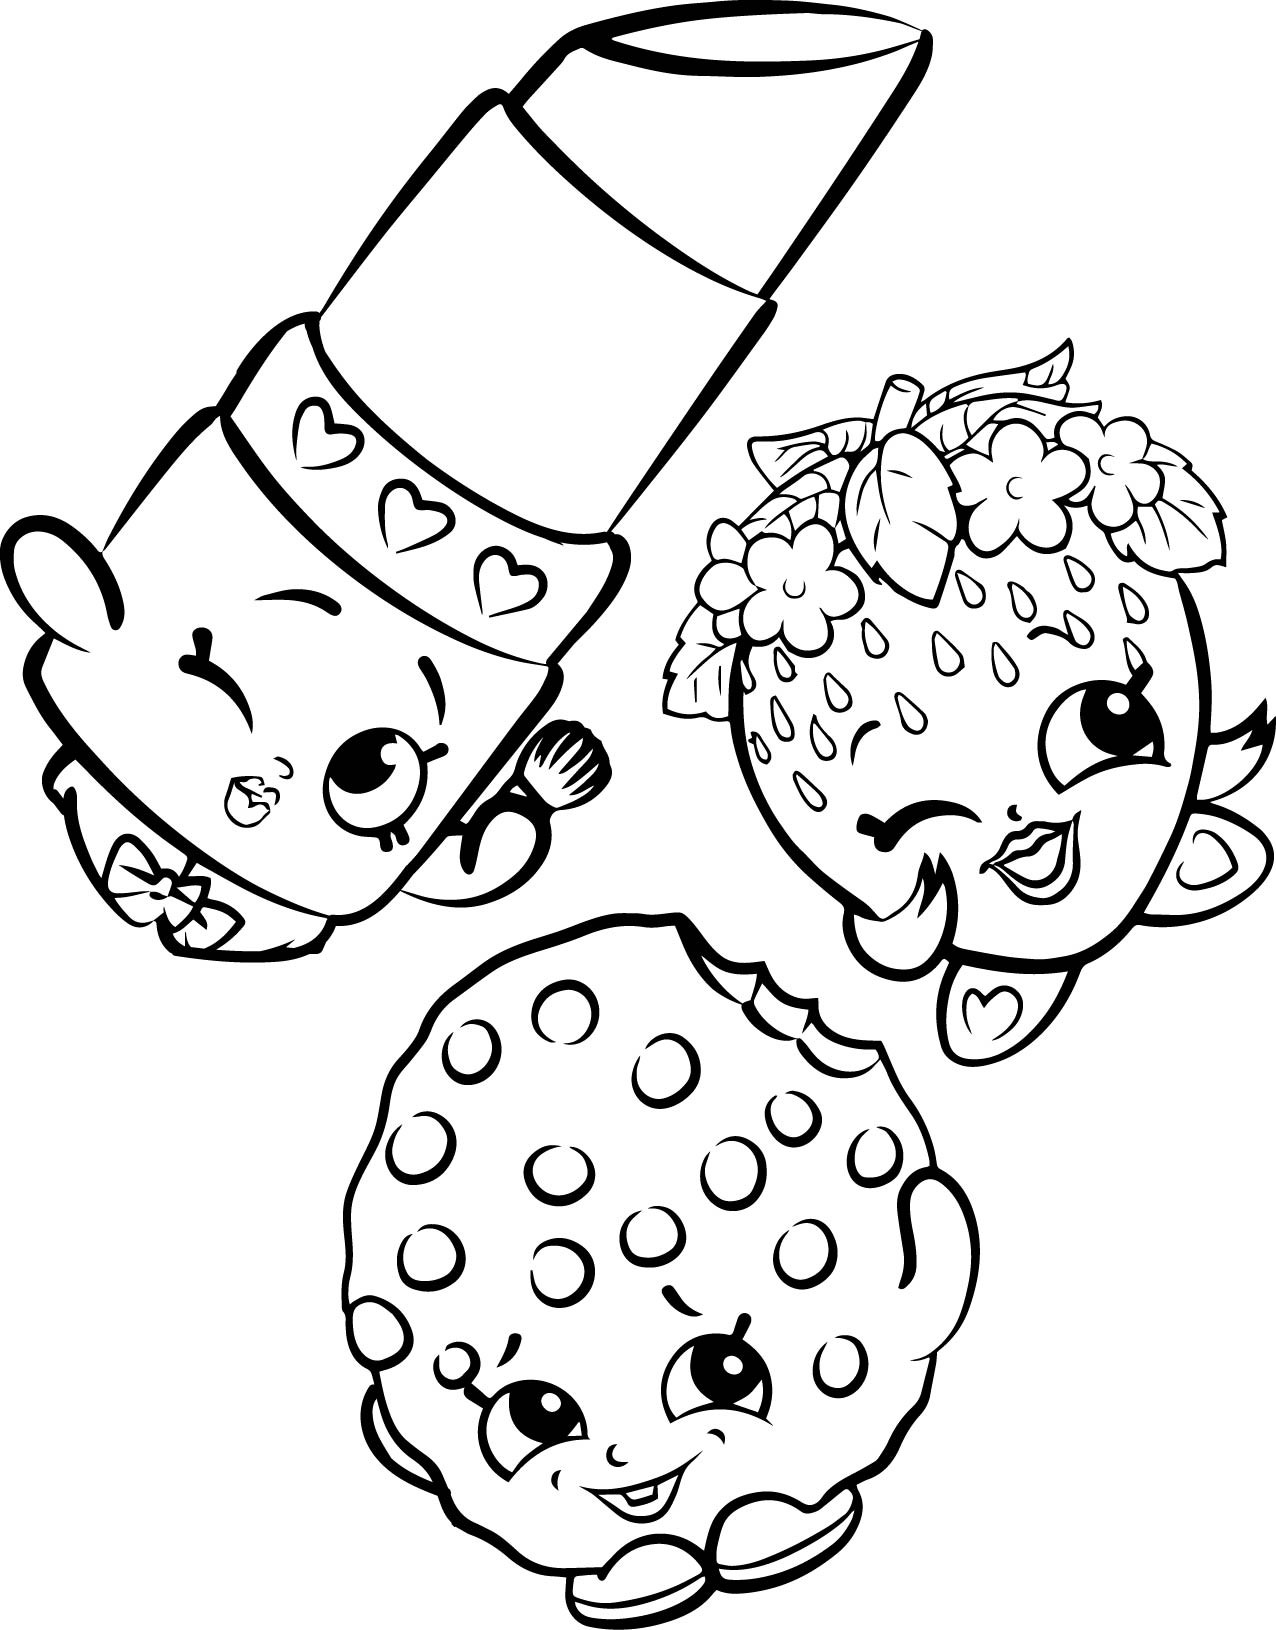 Coloring Pages For Girls Shopkins Apple
 Shopkins Coloring Pages Best Coloring Pages For Kids